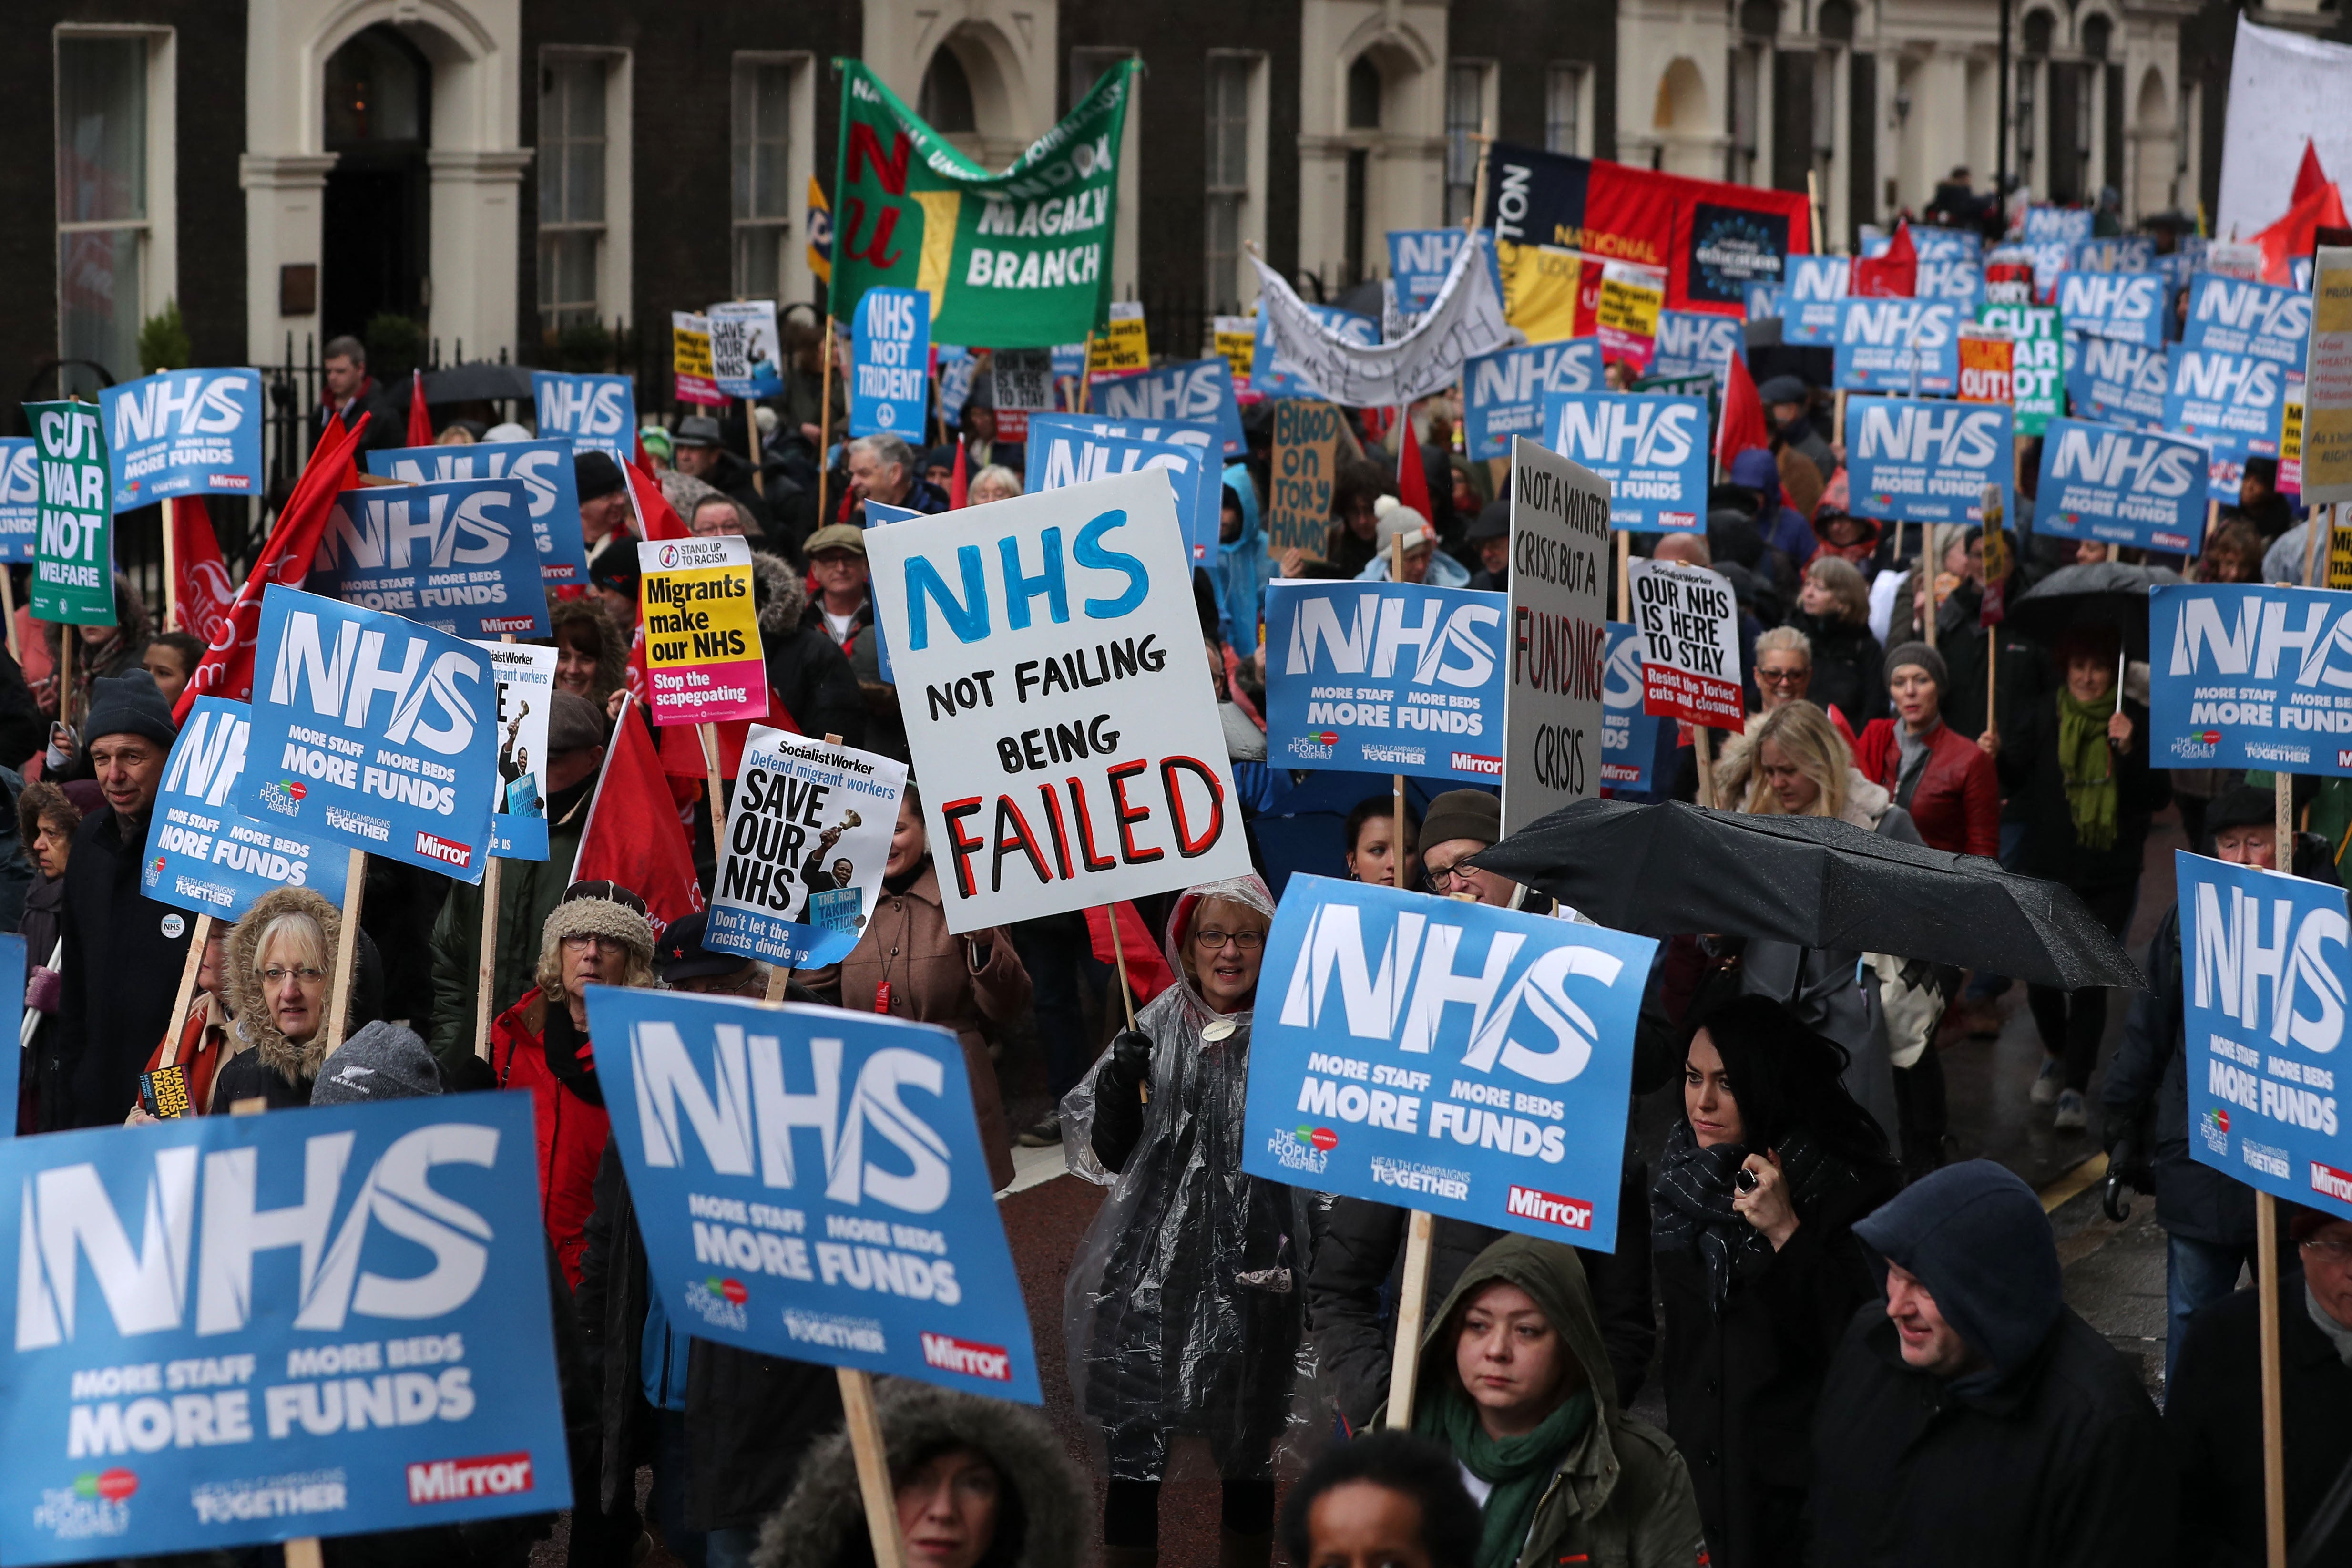 Many people see the crisis in the NHS and are frustrated by those in charge refusing to fix the problems. Instead of solutions the government chooses obfuscation